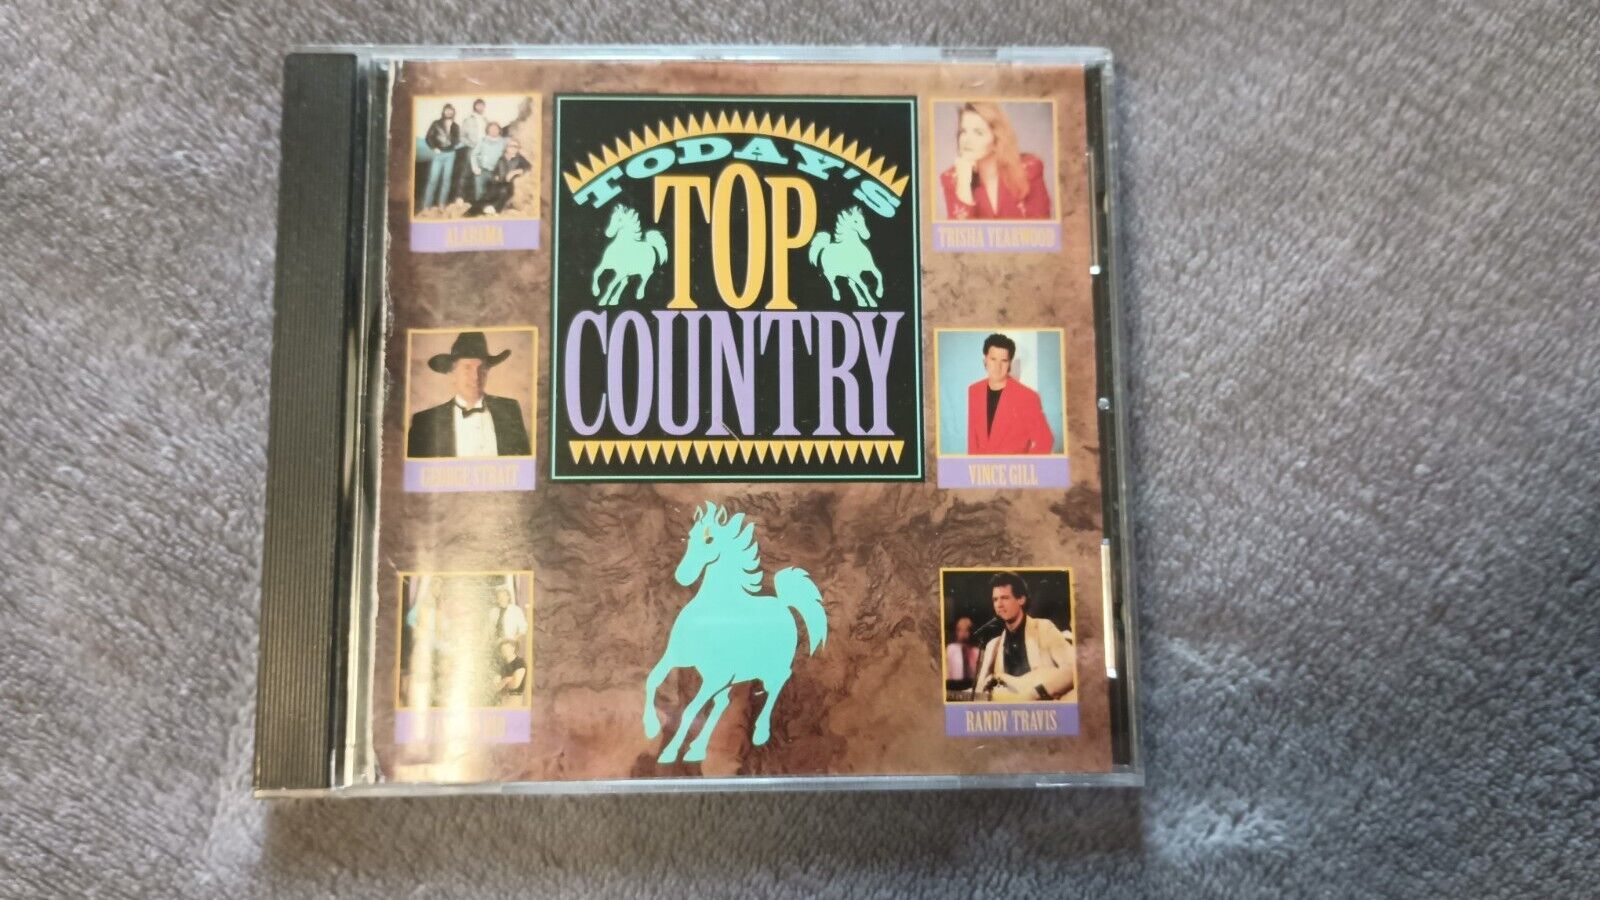  Today\'s Top Country 1993 K-Tel Records